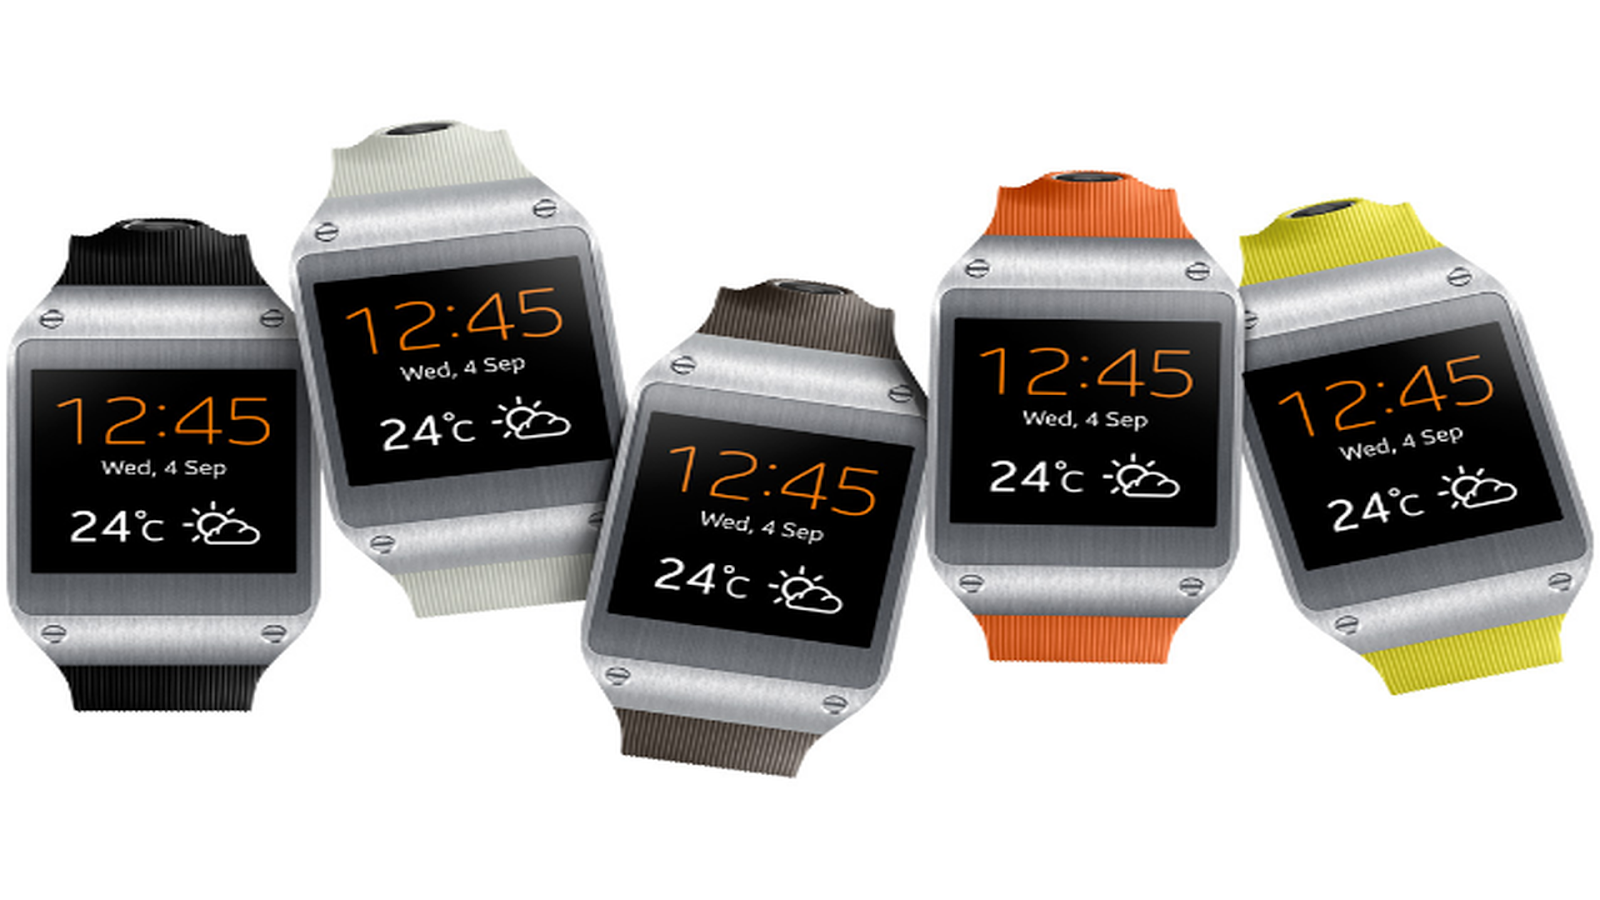 Samsung Gear 2 User Manual Pdf - limeclever